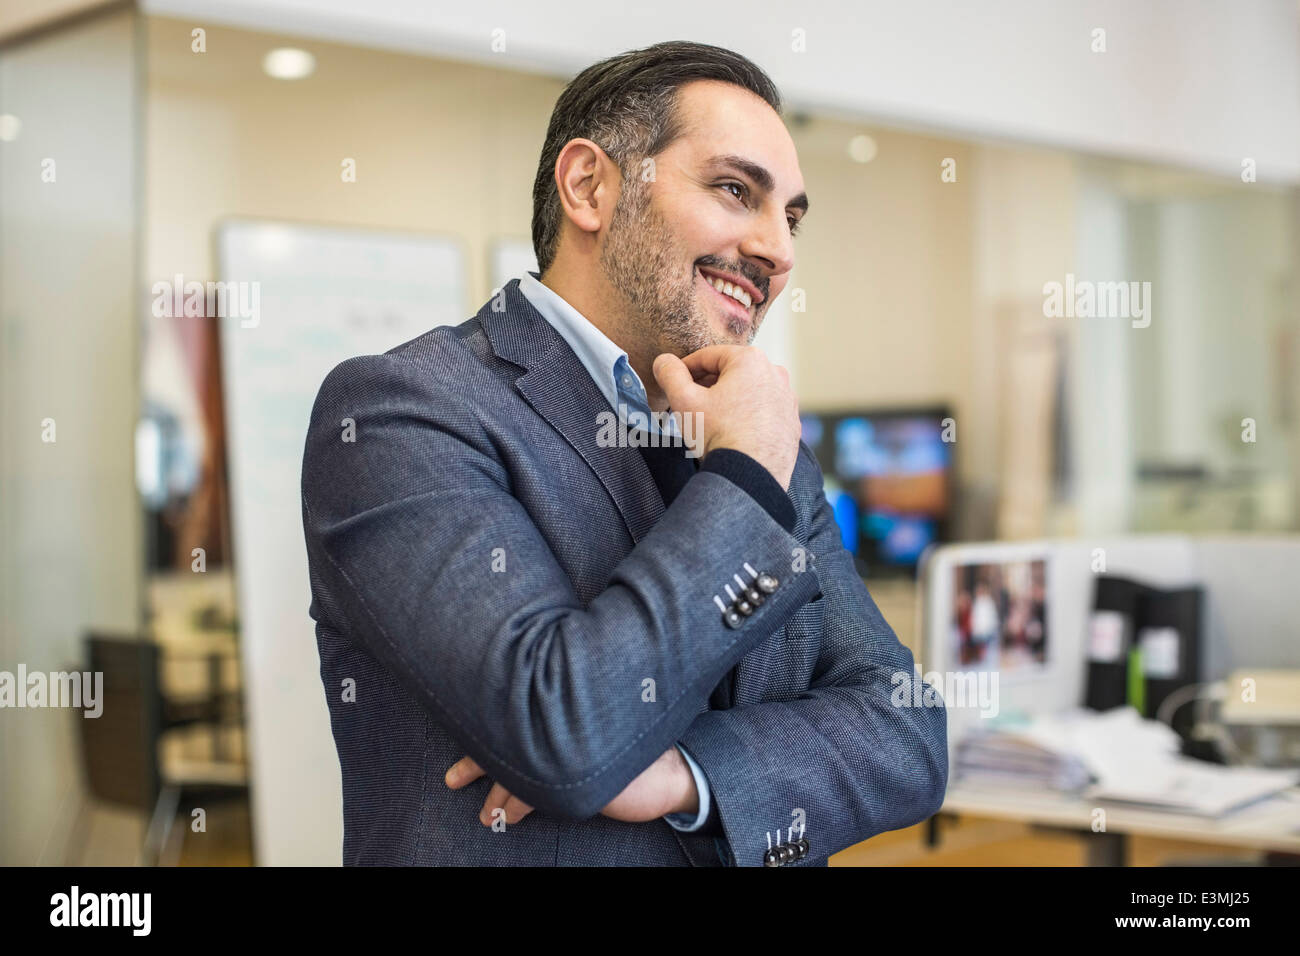 Smiling mid adult businessman with hand on chin looking away in office Stock Photo